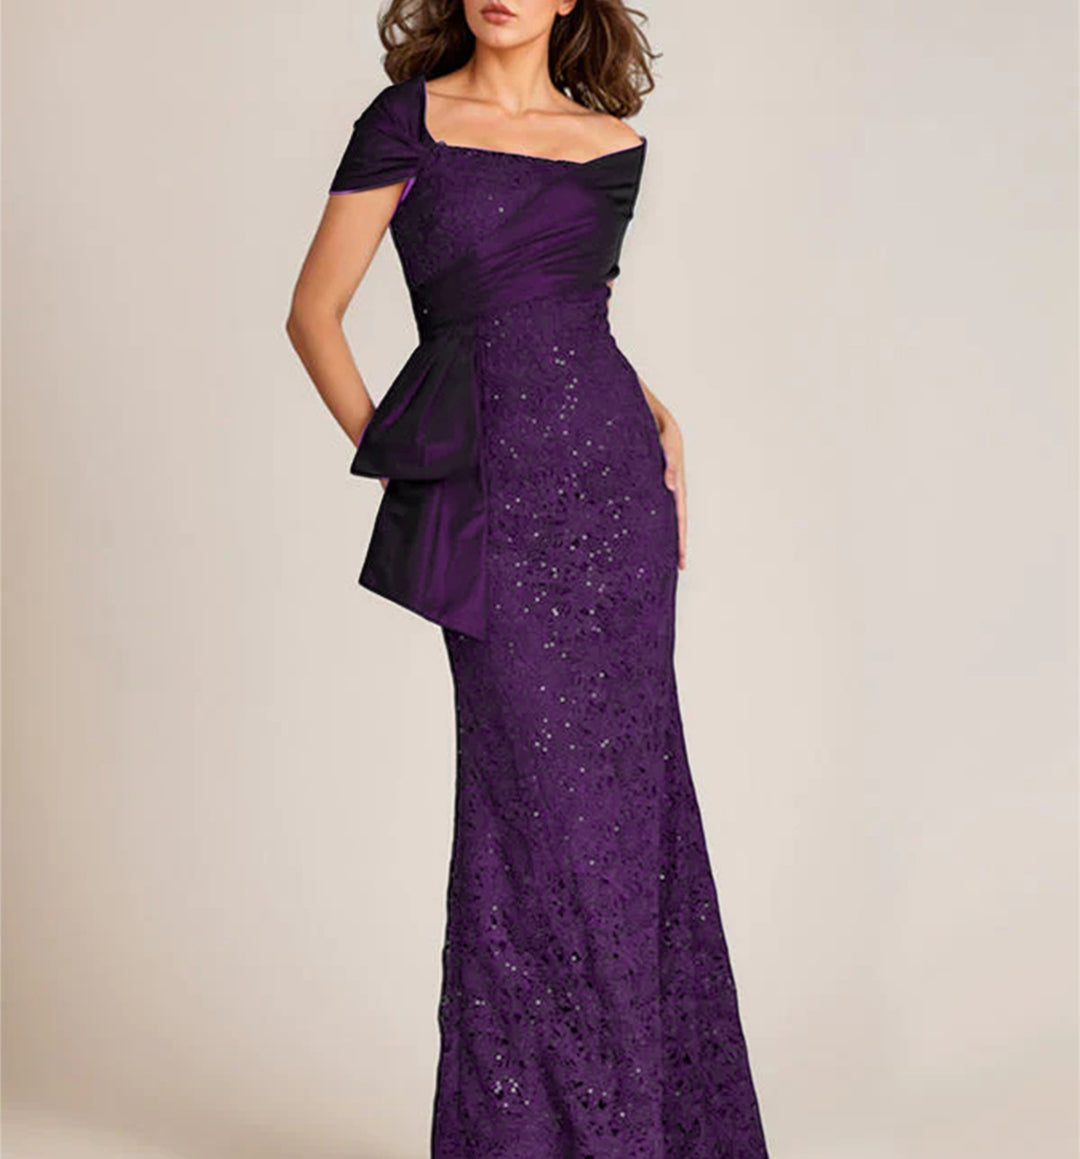 Trumpet/Mermaid Off-the-Shoulder Lace Mother of the Bride Dresses with Applique & Beading